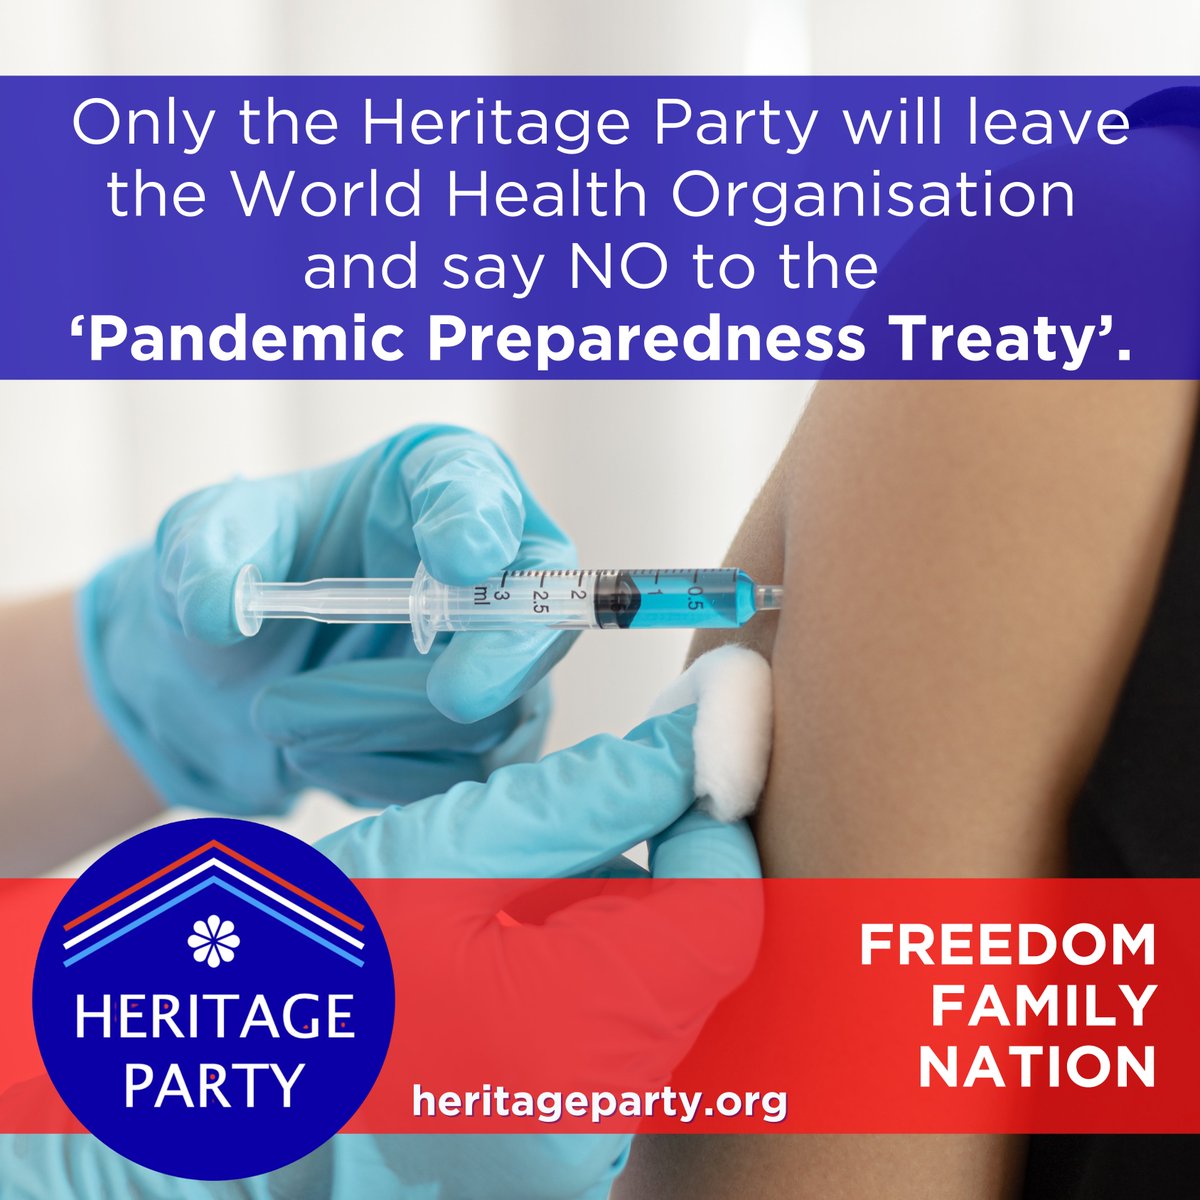 STOP the W.H.O. Pandemic Preparedness Treaty. heritageparty.org